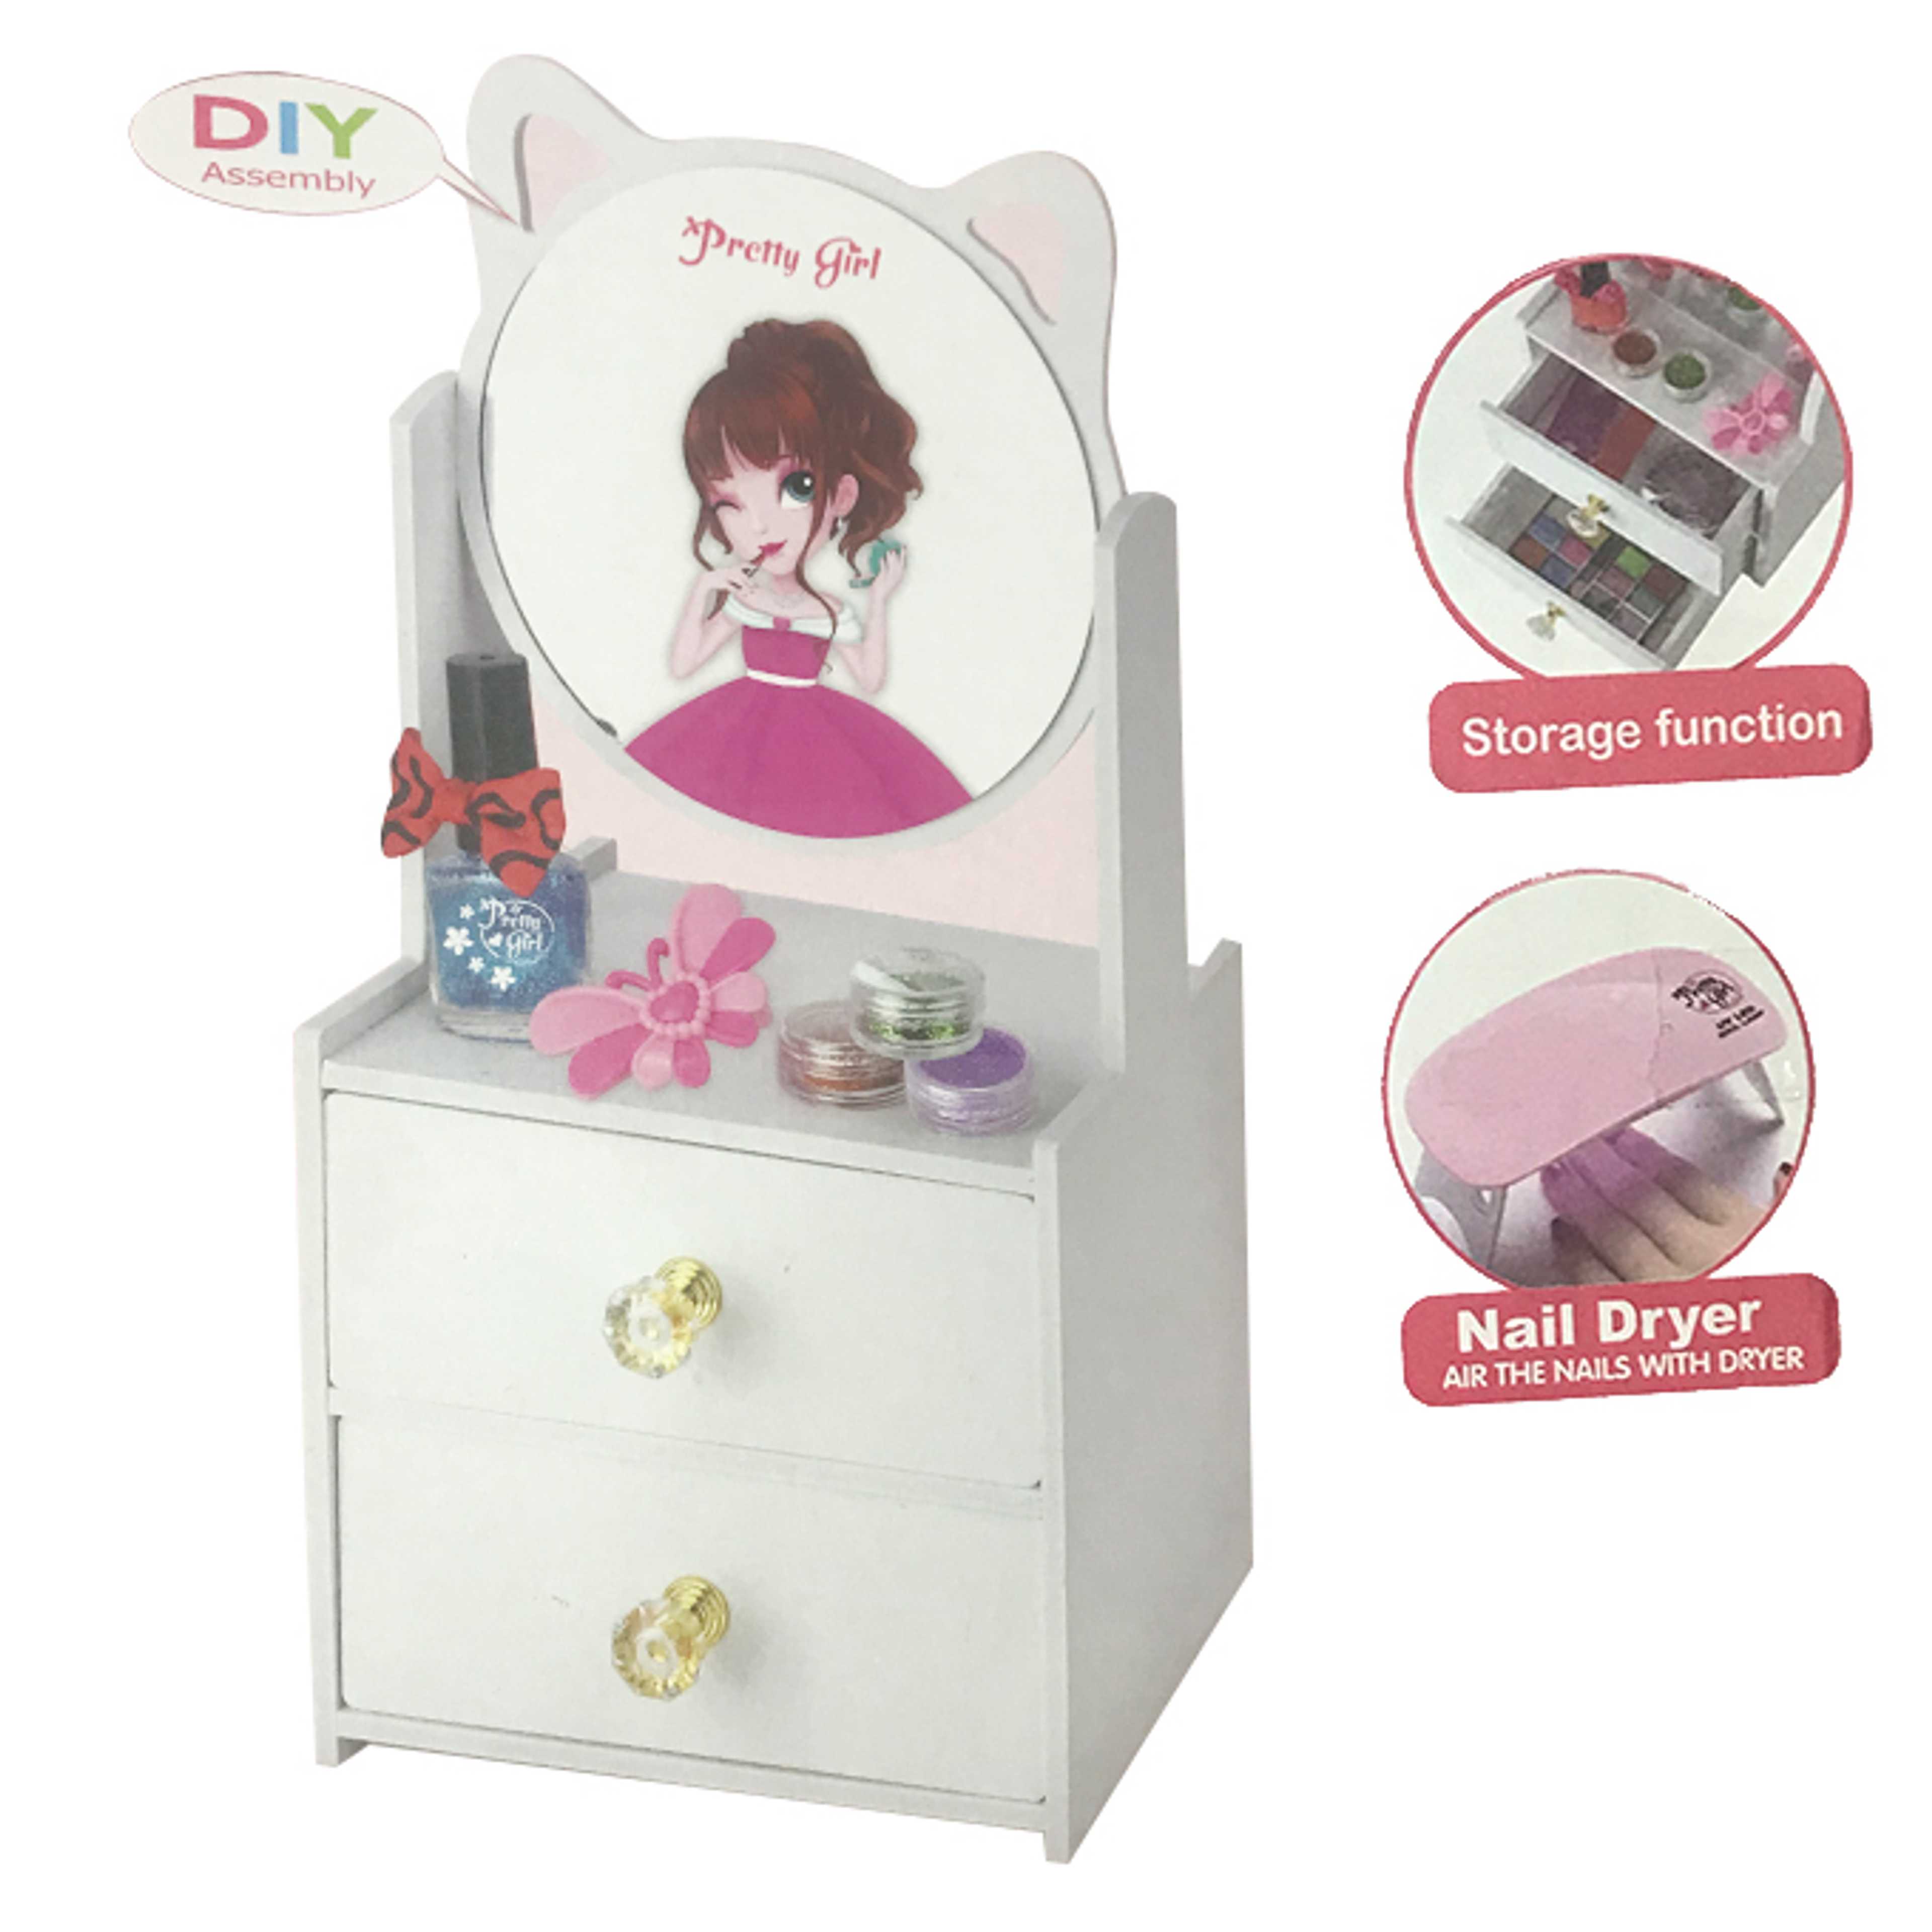 Kids Wooden DIY Dressing Table Toy with Make Up Kit and Nail Dryer - 21Pcs